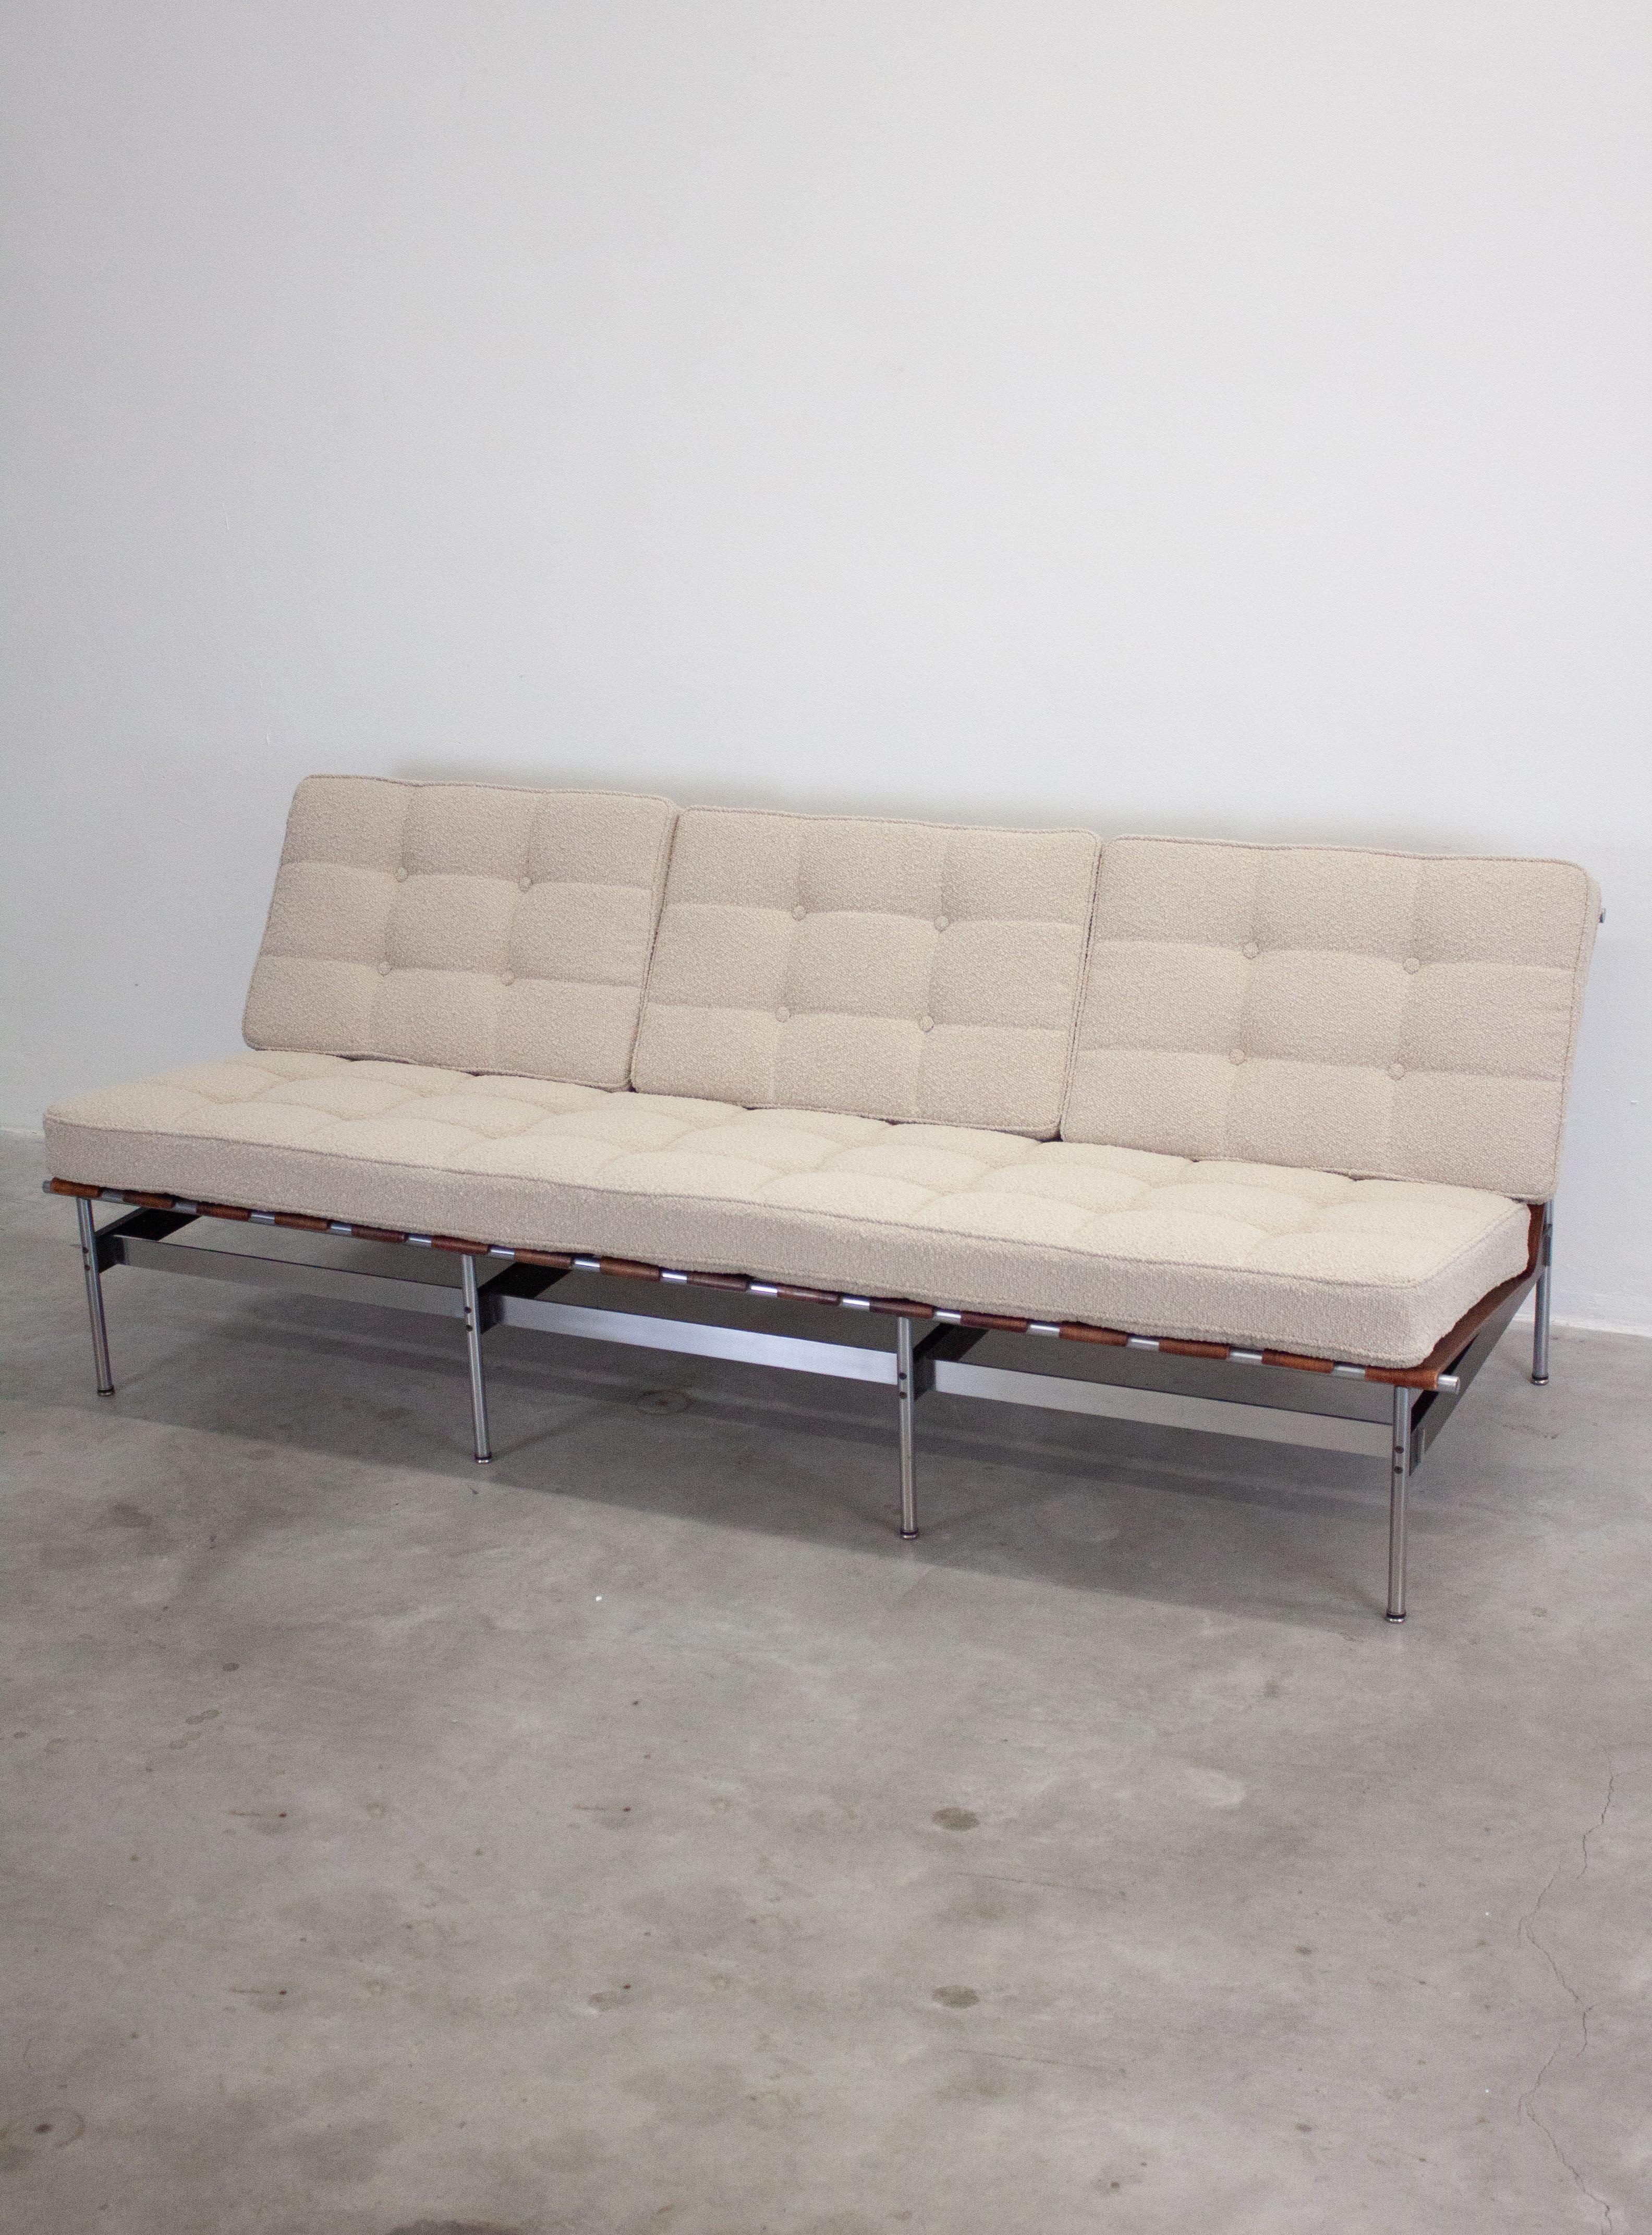 This rare 3 seater sofa with model name C416/3 is designed by Dutch designer Kho Liang Ie for Artifort in 1959. The design was very progressive for the time because of the mix of materials and it's therefor one of the best designs by Kho Liang Le